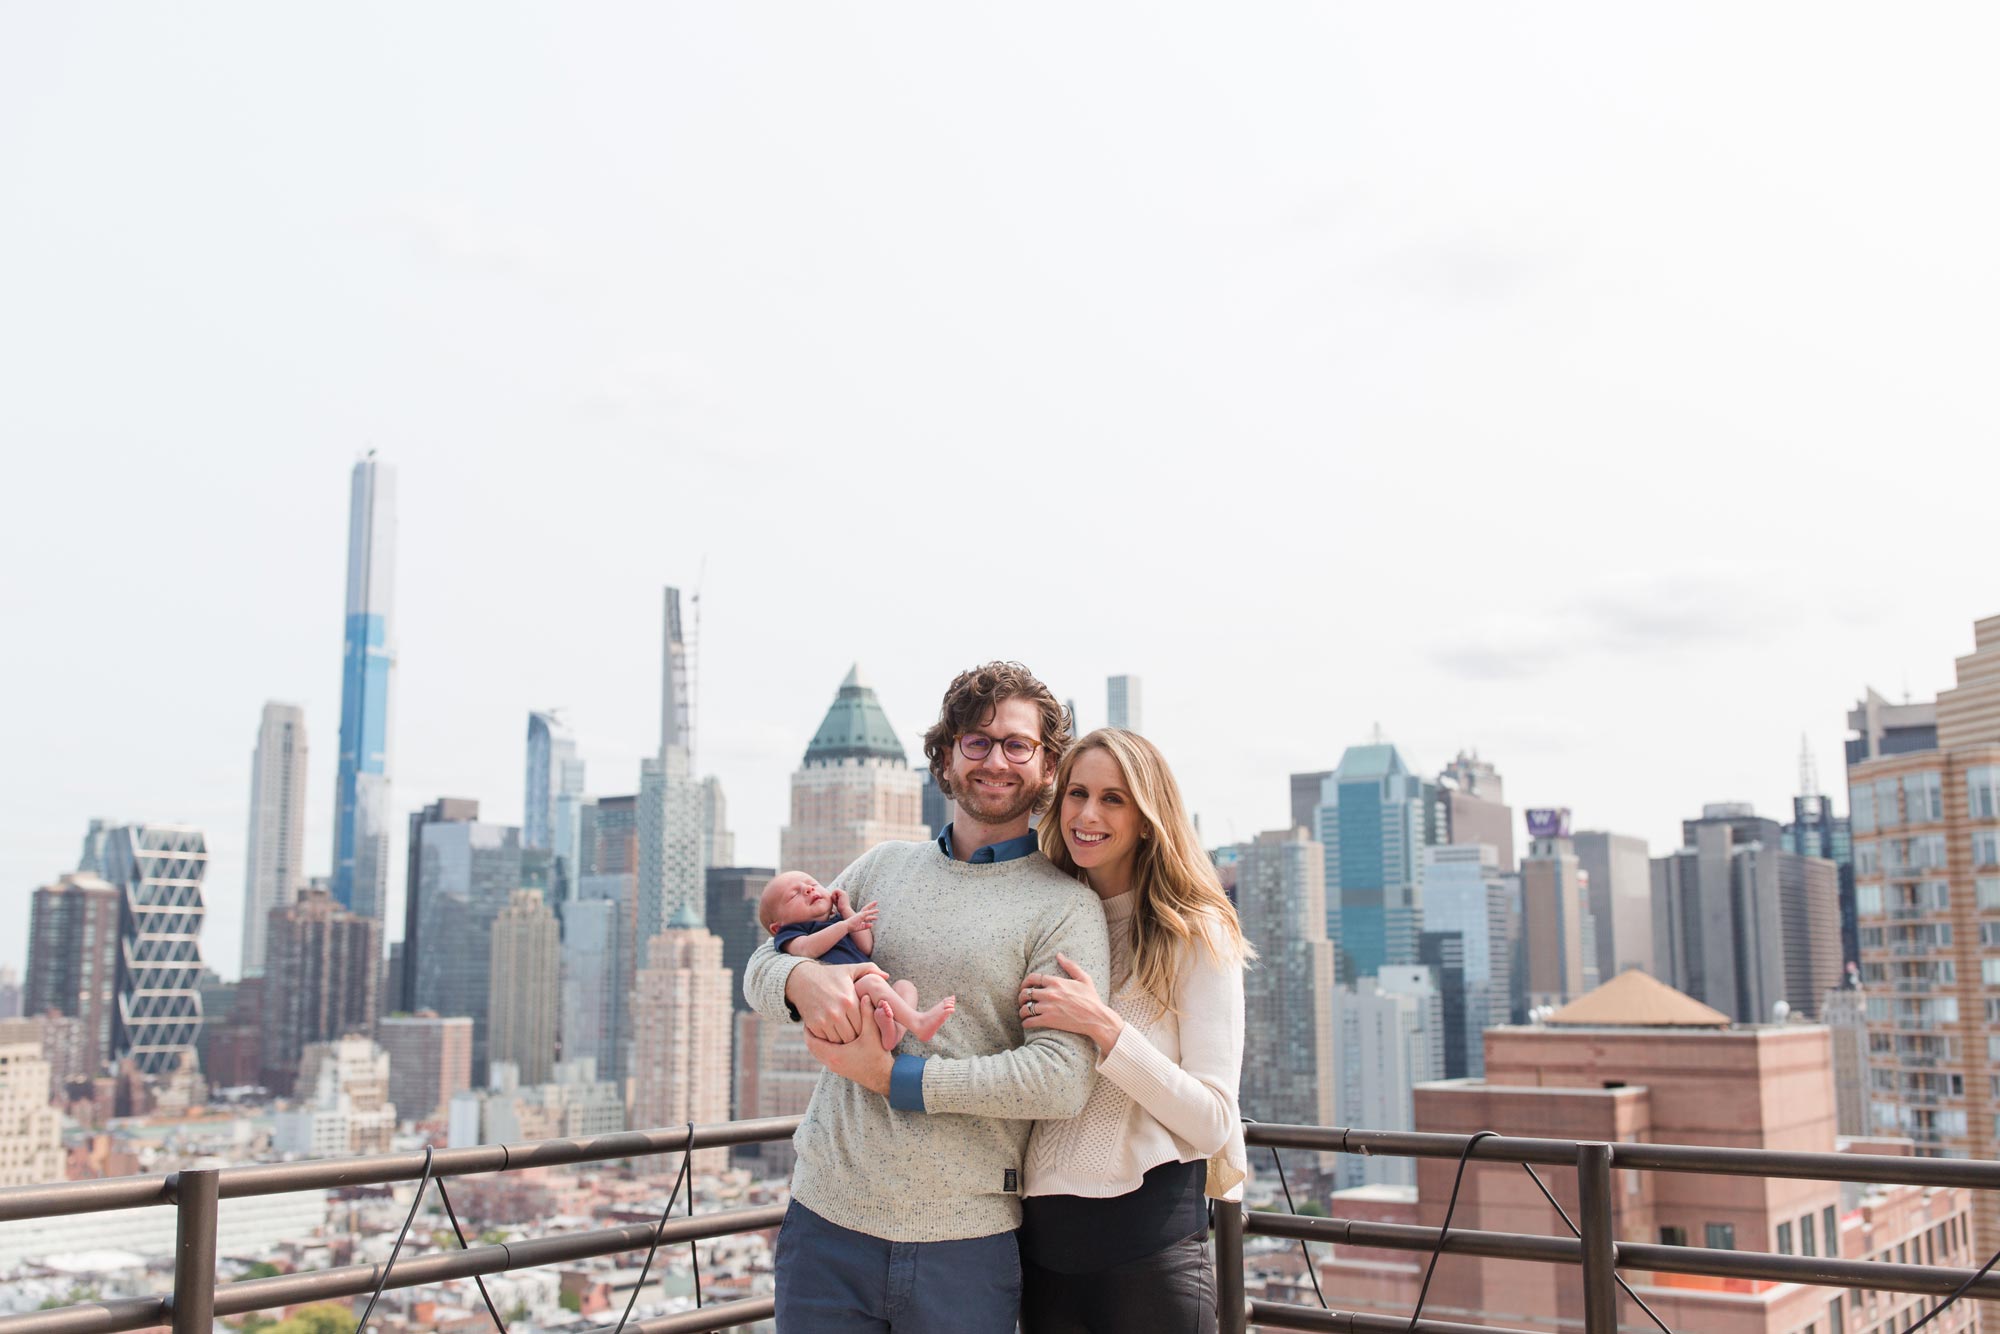 Allie Egan and her husband, Jim, and son Cooper, pose for photo with city skyline behind them